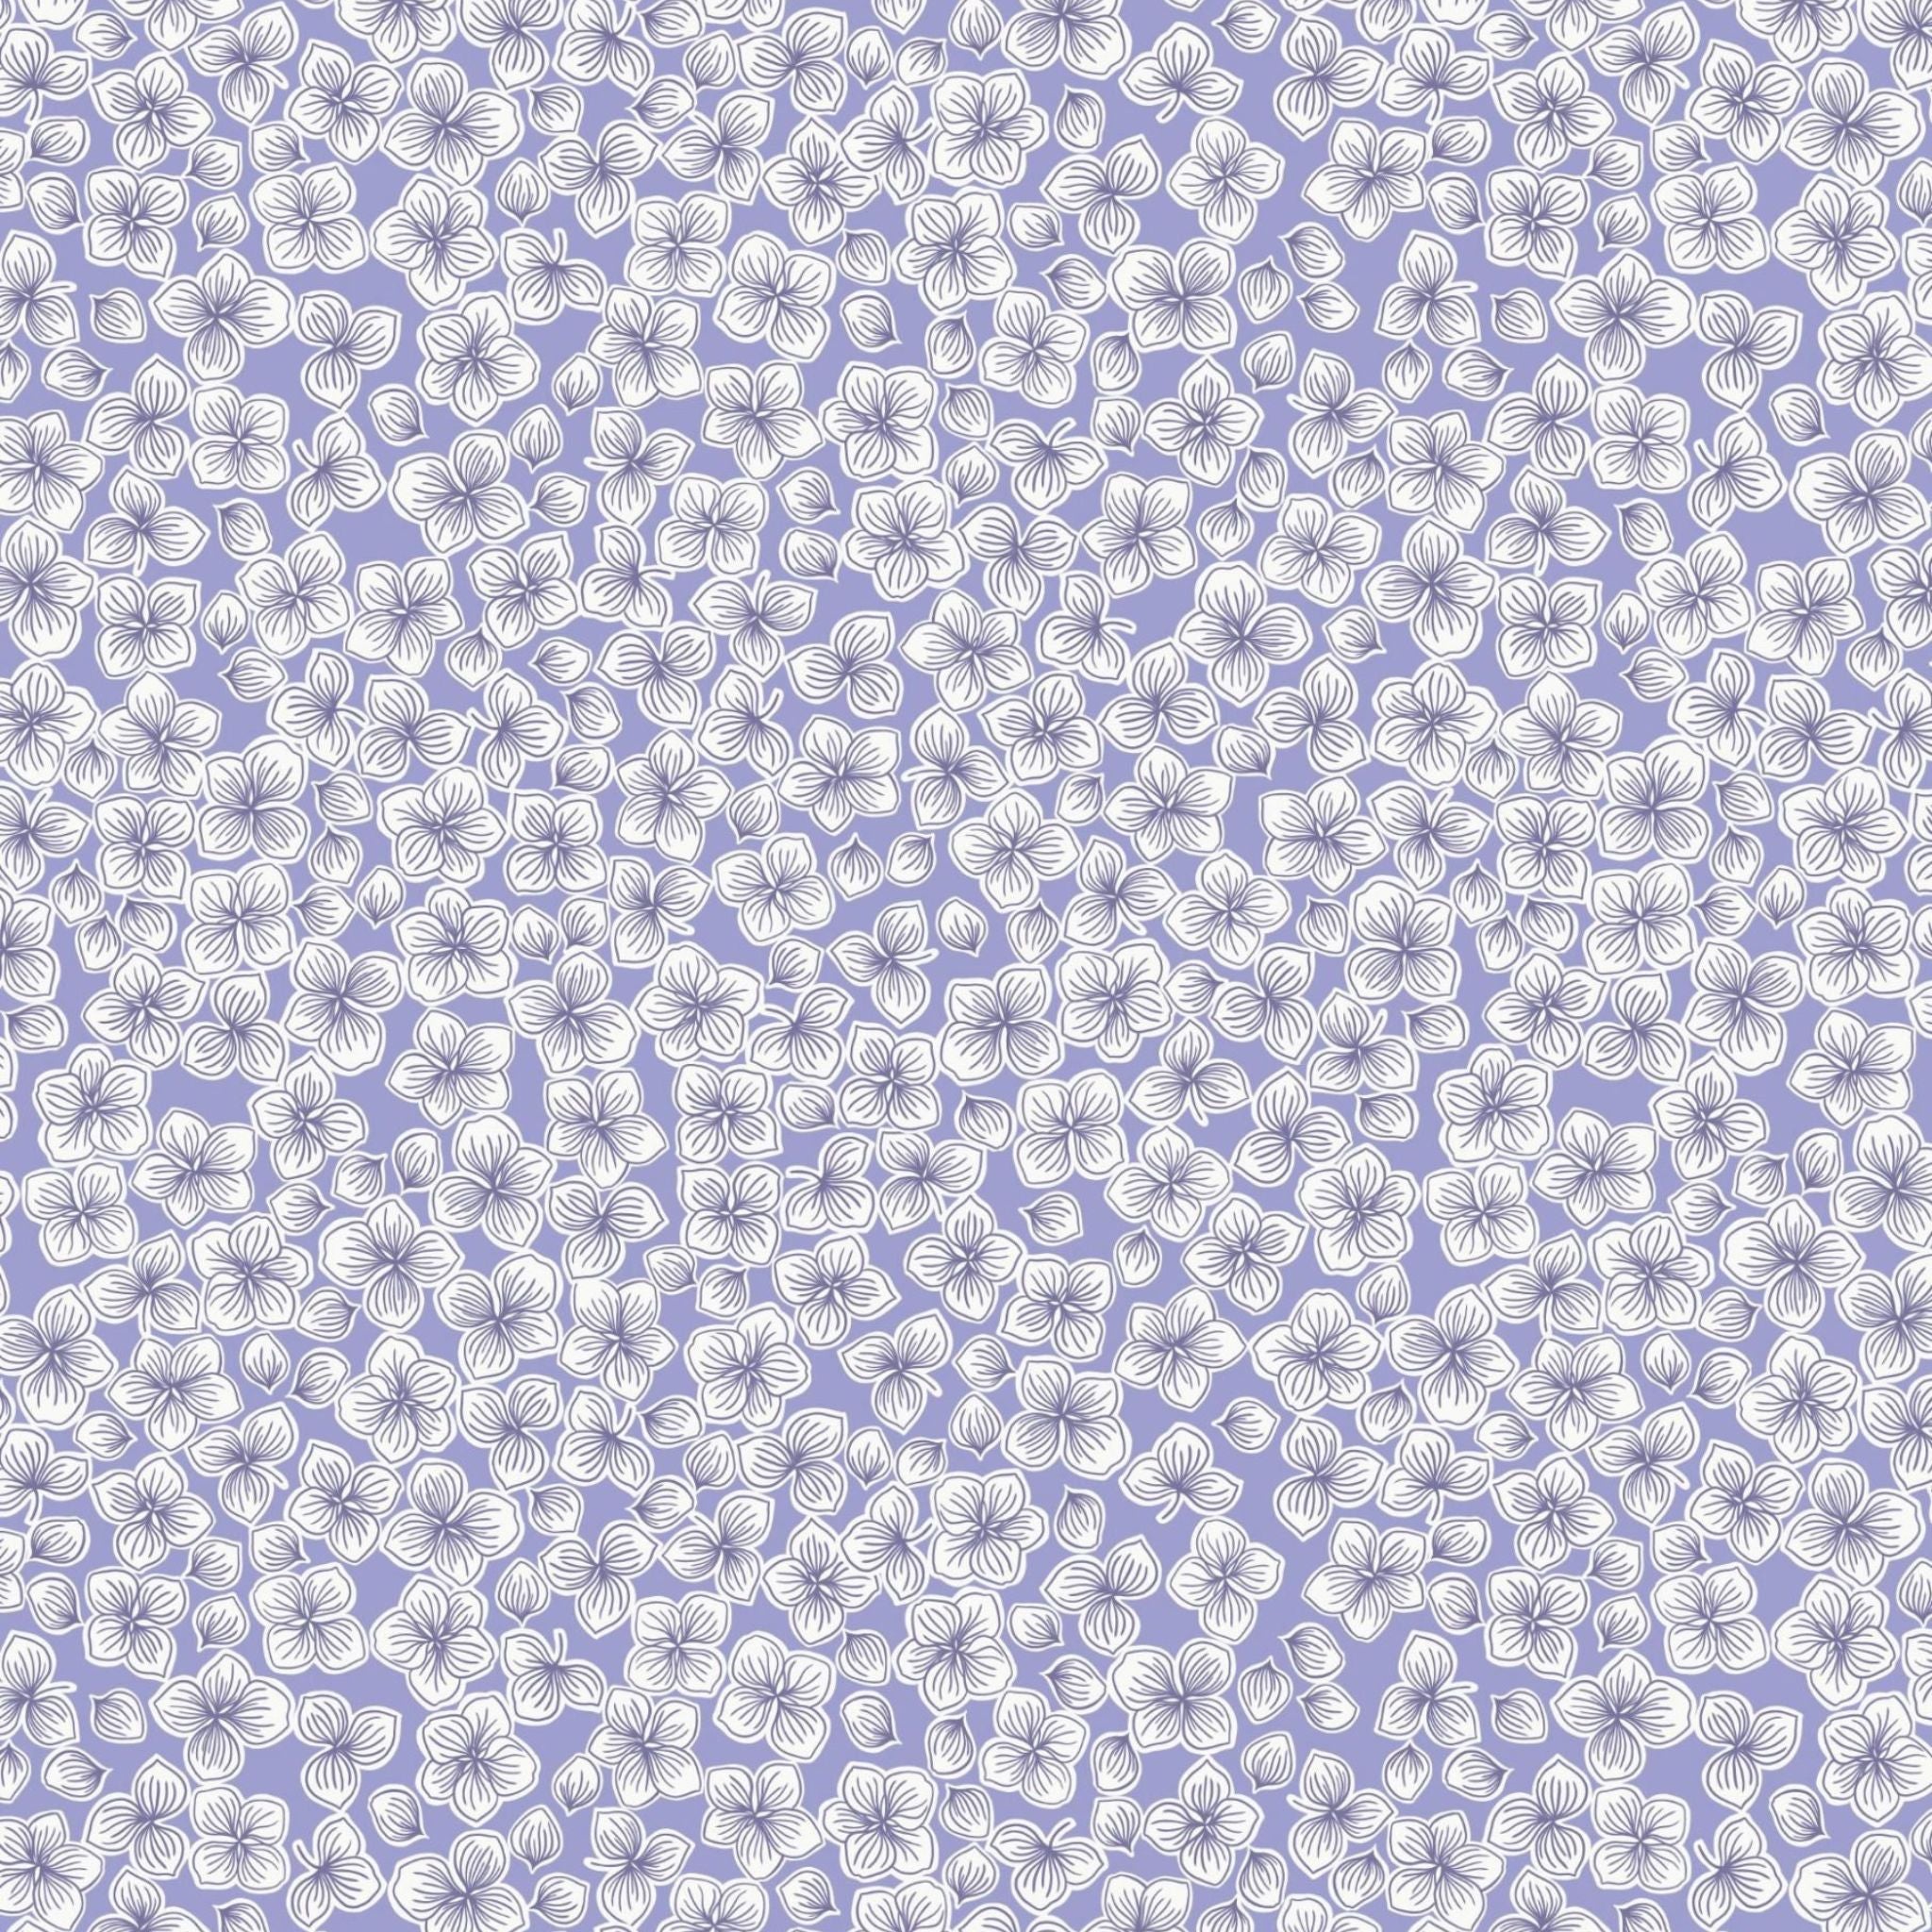 Tiny white flower petals on a light blue purple cotton fabric - Love Blooms by Lewis and Irene